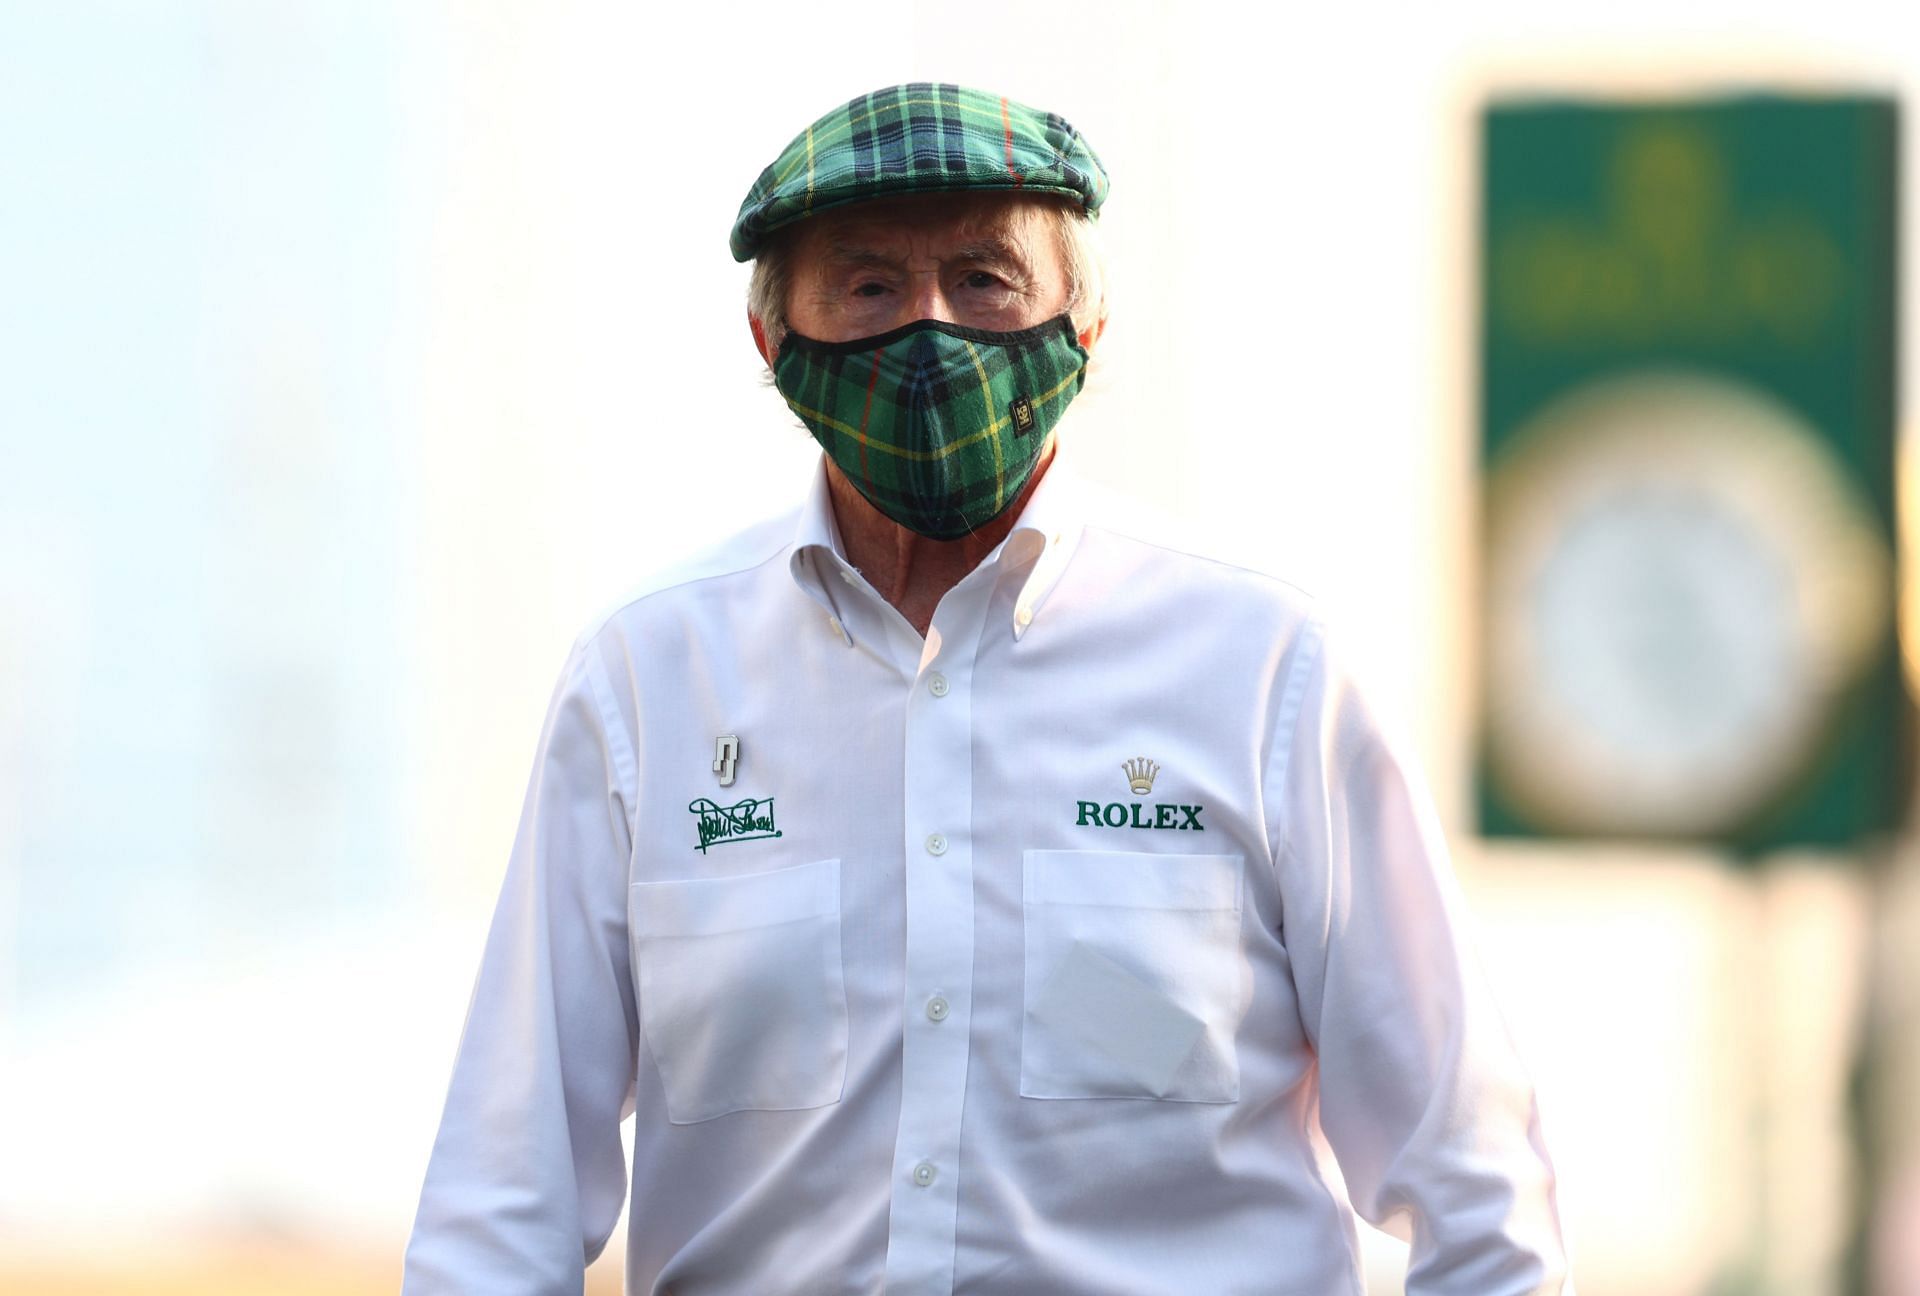 Sir Jackie Stewart walks in the Paddock before the F1 Grand Prix of Saudi Arabia at Jeddah Corniche Circuit (Photo by Mark Thompson/Getty Images)